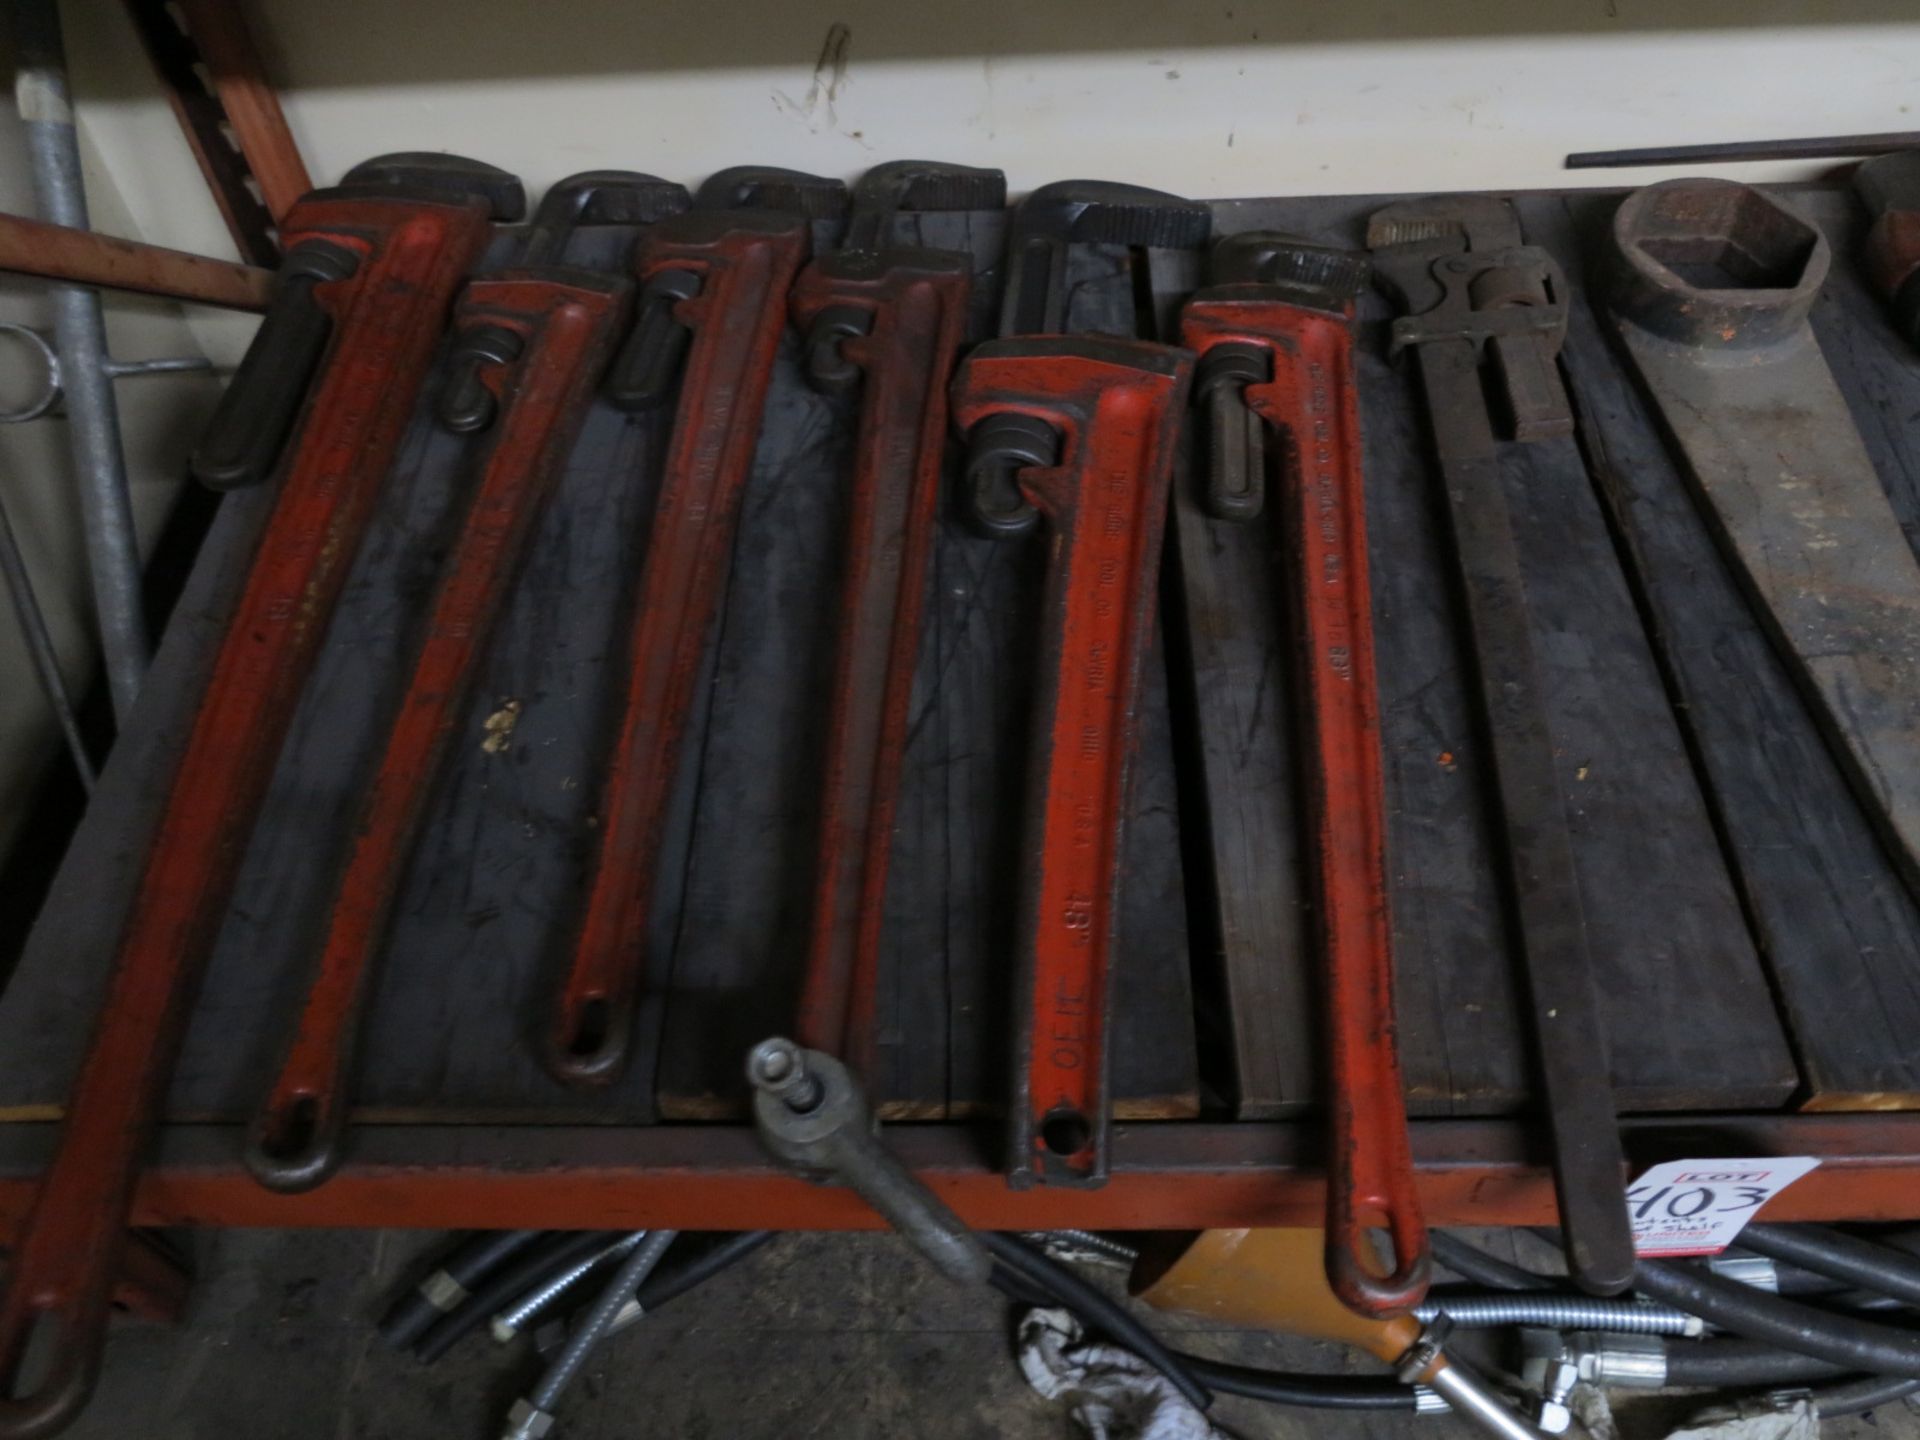 LOT - (9) PIPE WRENCHES UP TO 4', SLIDE HAMMER, ETC. - Image 2 of 3